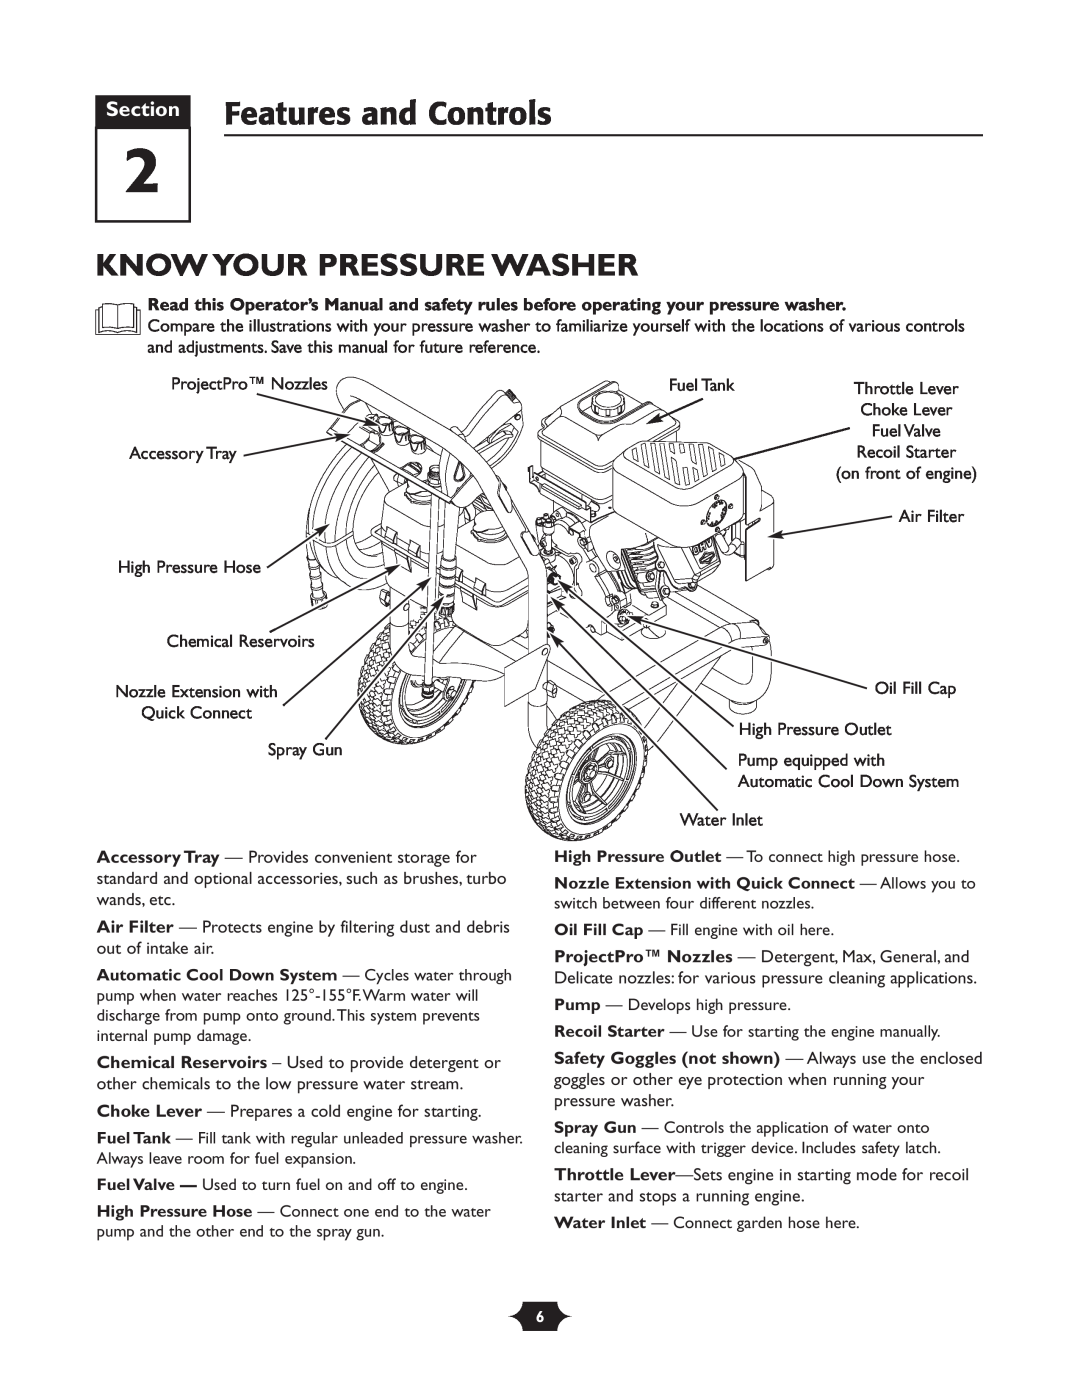 Briggs & Stratton 20263 manual Section Features and Controls, Know Your Pressure Washer 